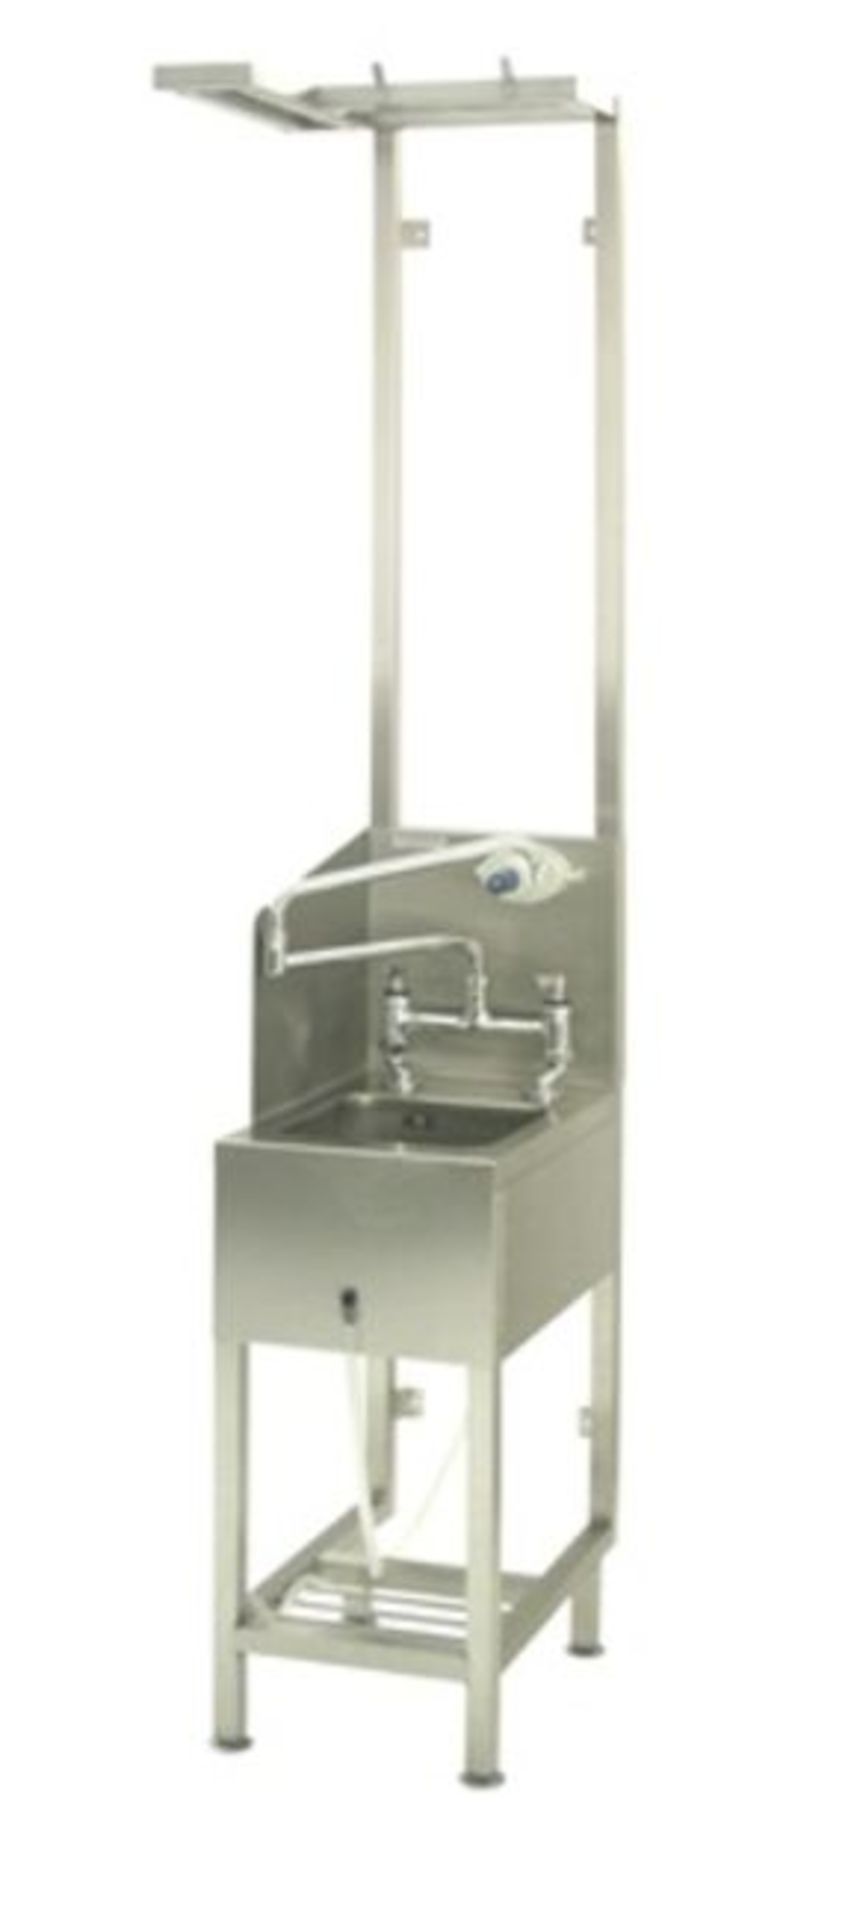 1 x Stainless Steel Commercial Kitchen Janitorial Mop / Cleaning Station - Dimensions: H187 x W33